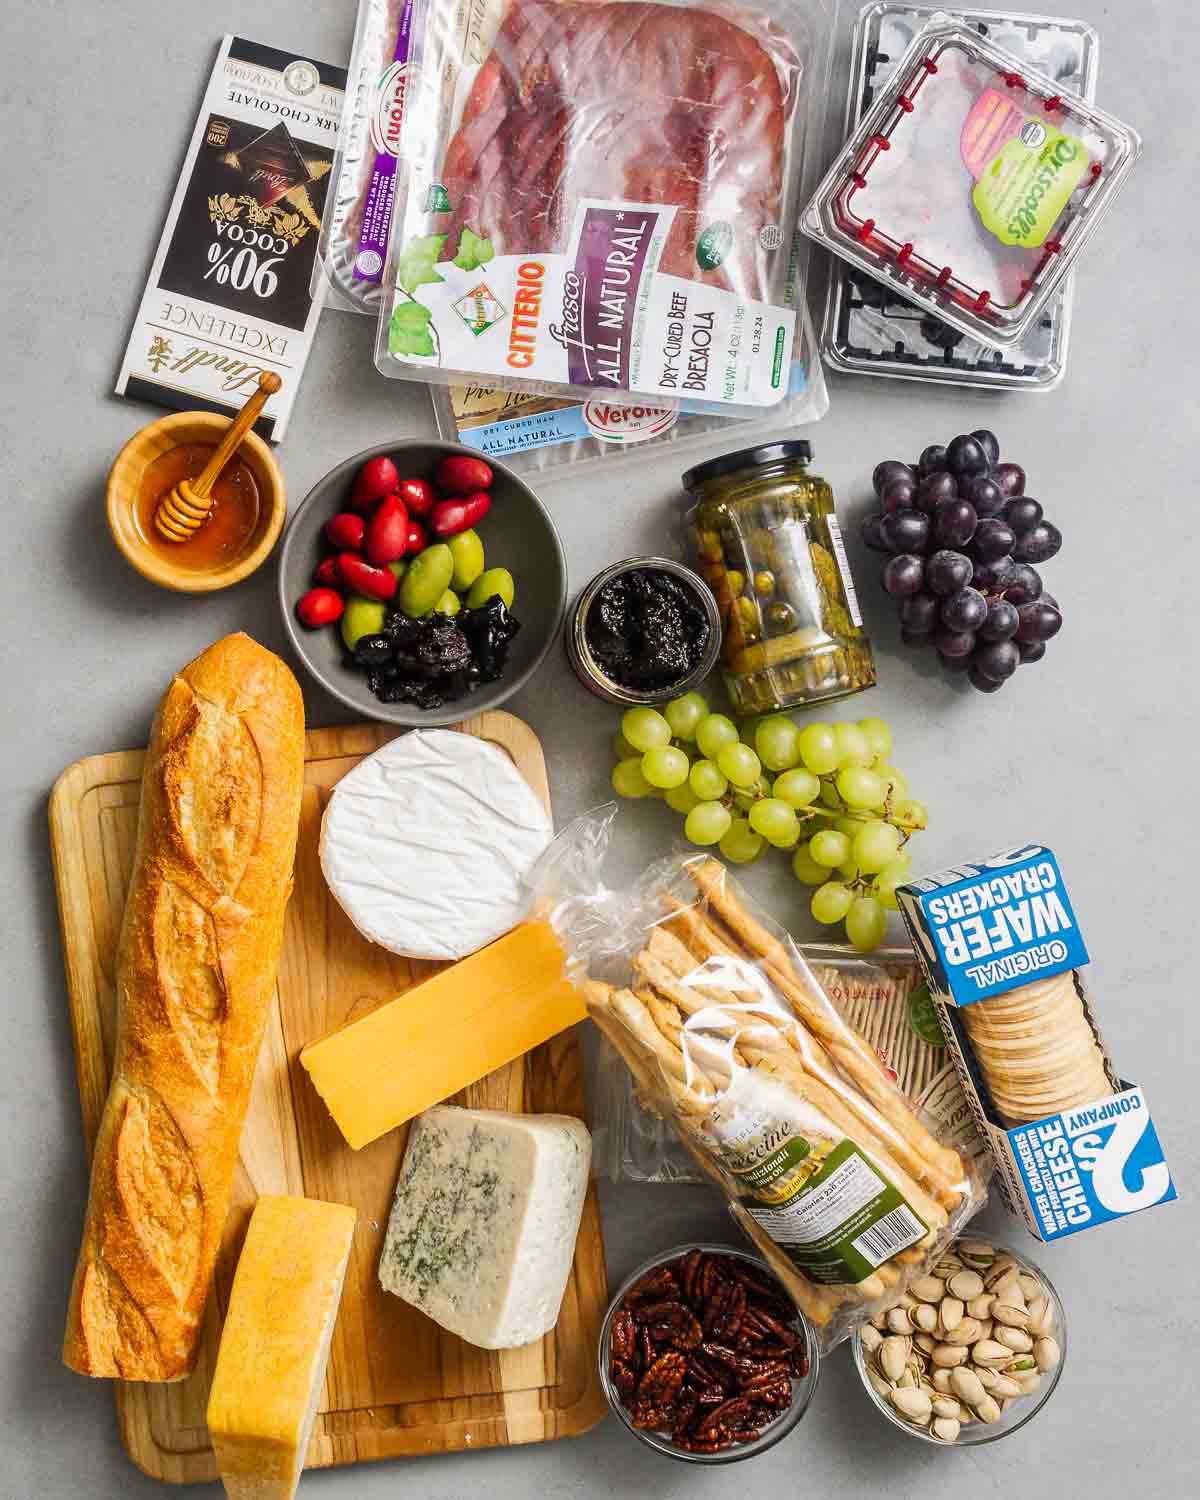 Ingredients shown: chocolate, cured meats, berries, honey, olives, jam, cornichon, grapes, baguette, cheeses, breadsticks, nuts, and crackers.